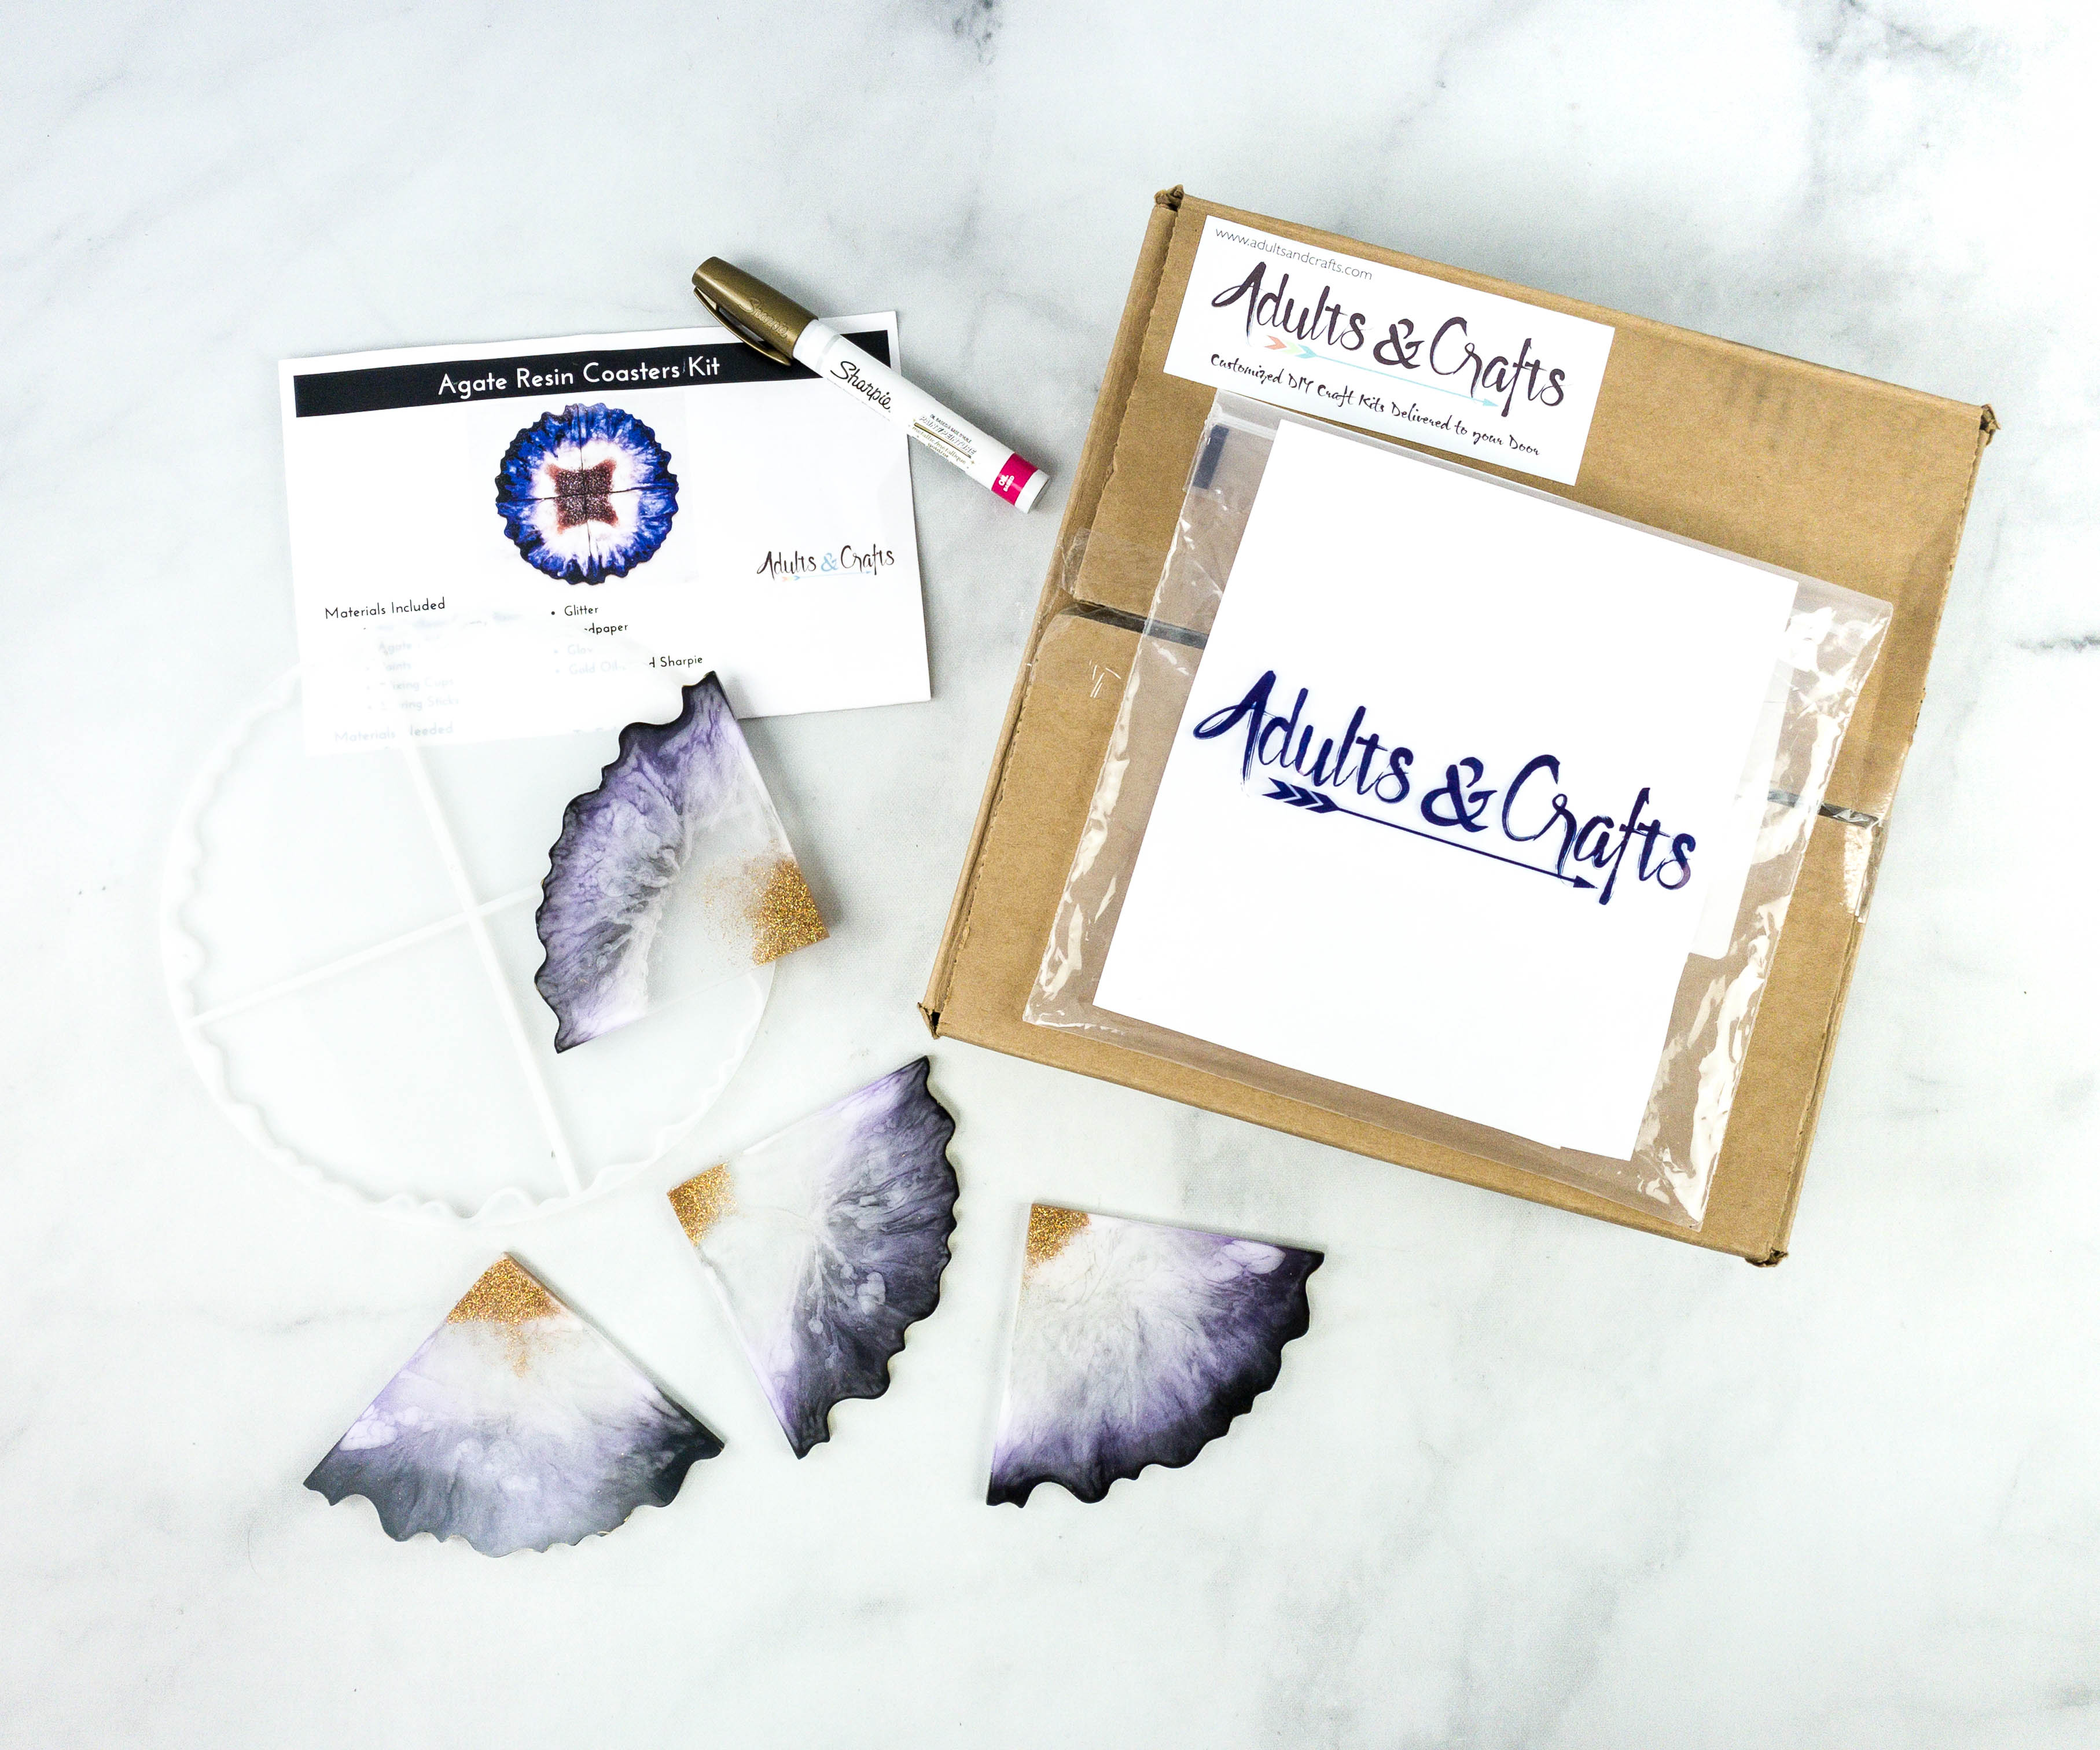 Adults & Crafts Subscription Box Review + Coupon - AGATE RESIN